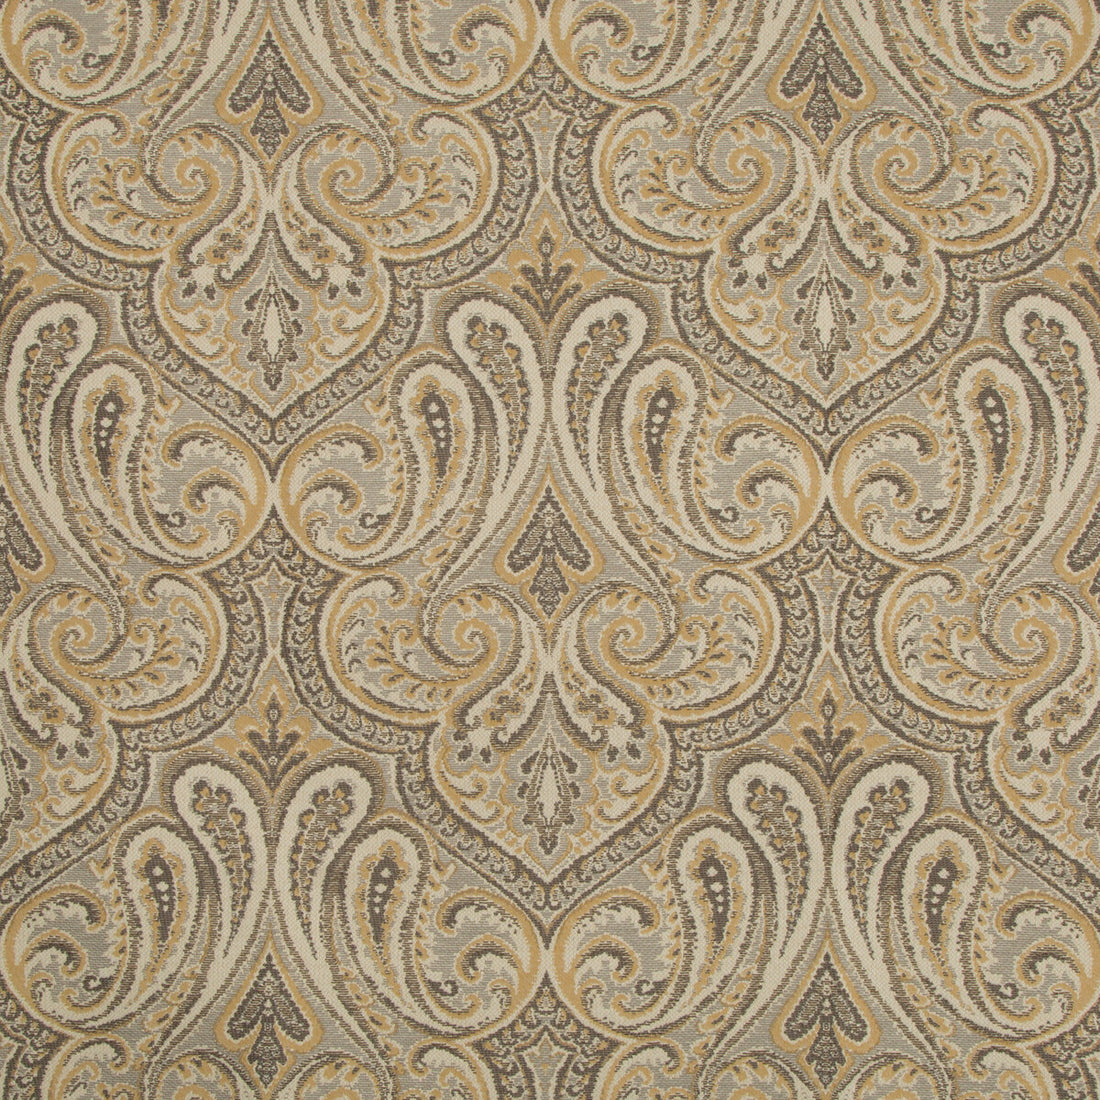 Kravet Design fabric in 34706-16 color - pattern 34706.16.0 - by Kravet Design in the Crypton Home collection